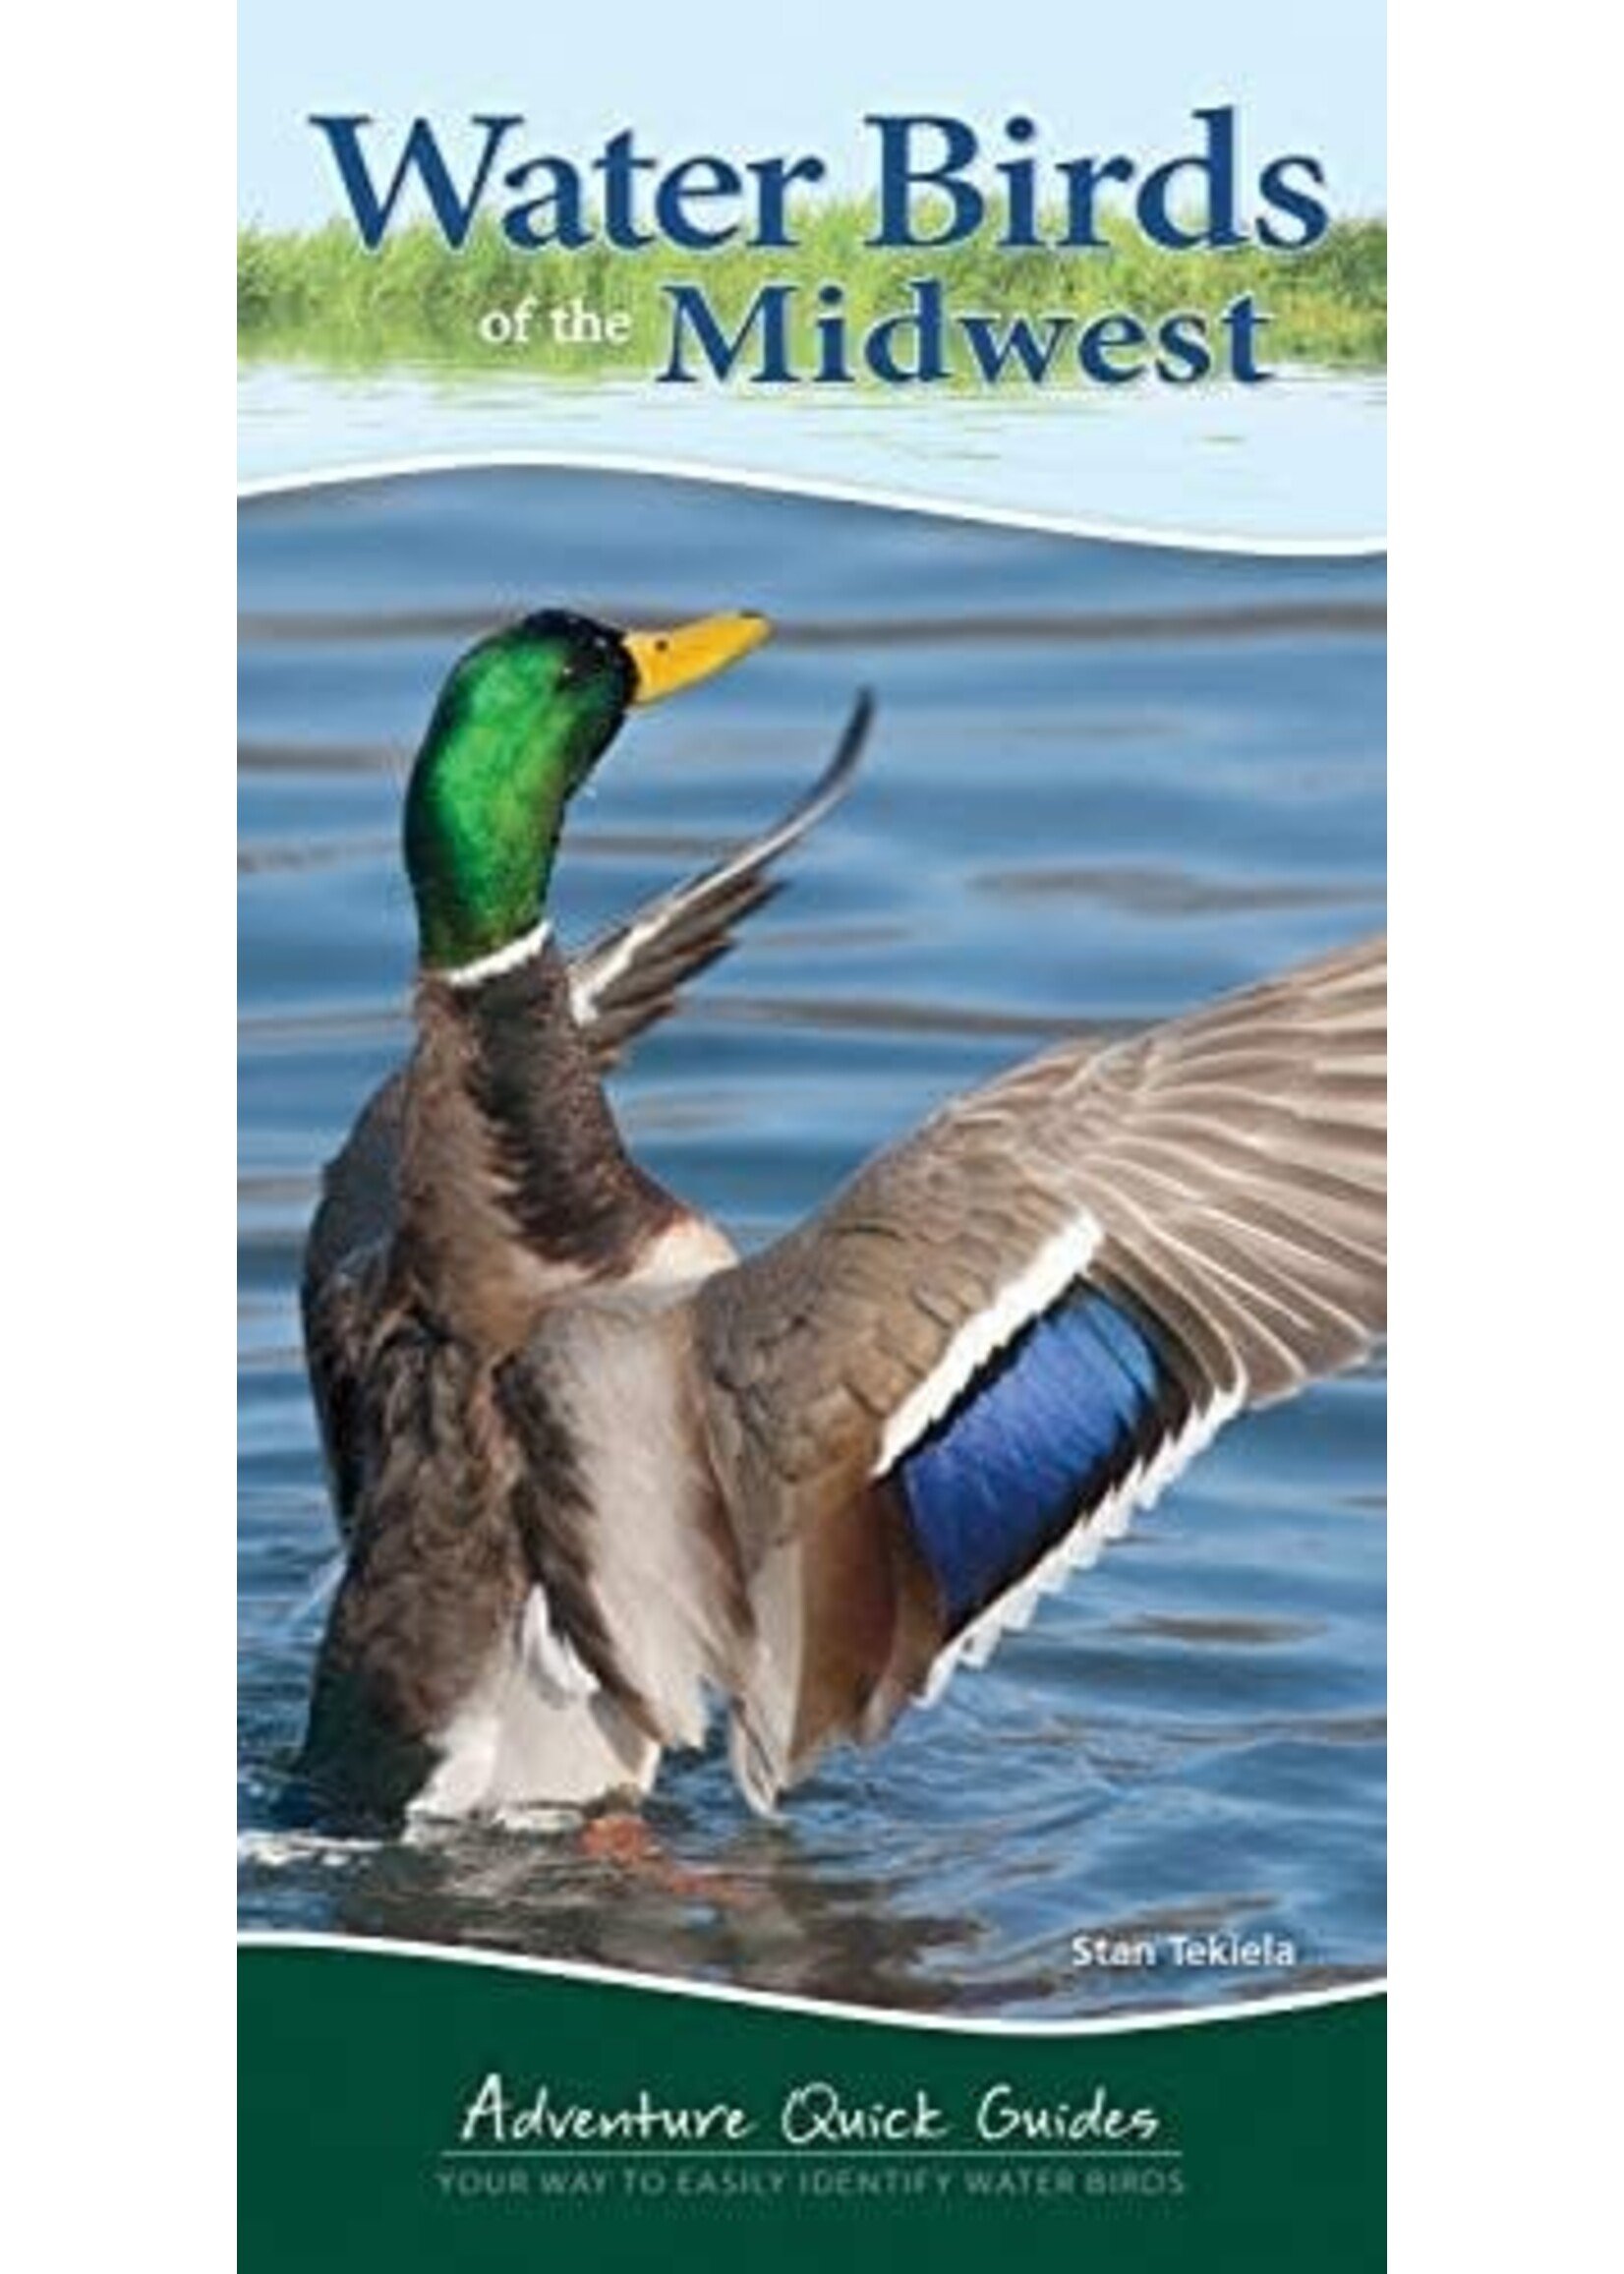 Water Birds of the Midwest: Your Way to Easily Identify Water Birds Adventure Quick Guide